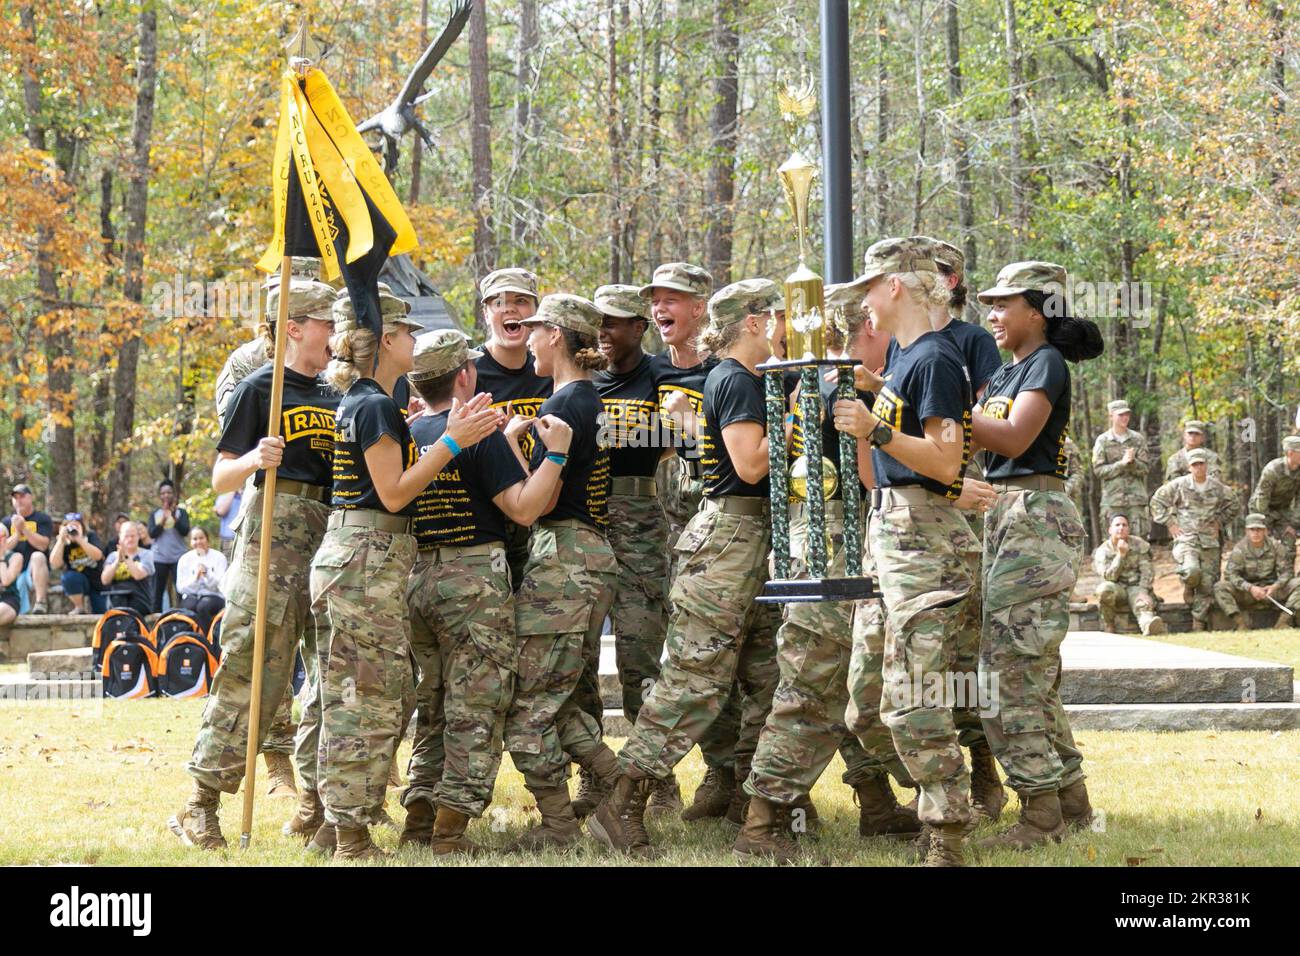 Leavenworth High School celebrates their first place win in the female division of the 2022 Army JROTC National Raider Championships. As the final day of the Raider Championships in Molena, Ga. came to an end on November 6, trophies were handed out to the top five schools in each of the events. Trophies were also awarded to the top performing schools that placed first and second in the male, female, and mixed divisions of the national championships. (Photo by Sarah Windmueller, U.S. Army Cadet Command Public Affairs) Stock Photo